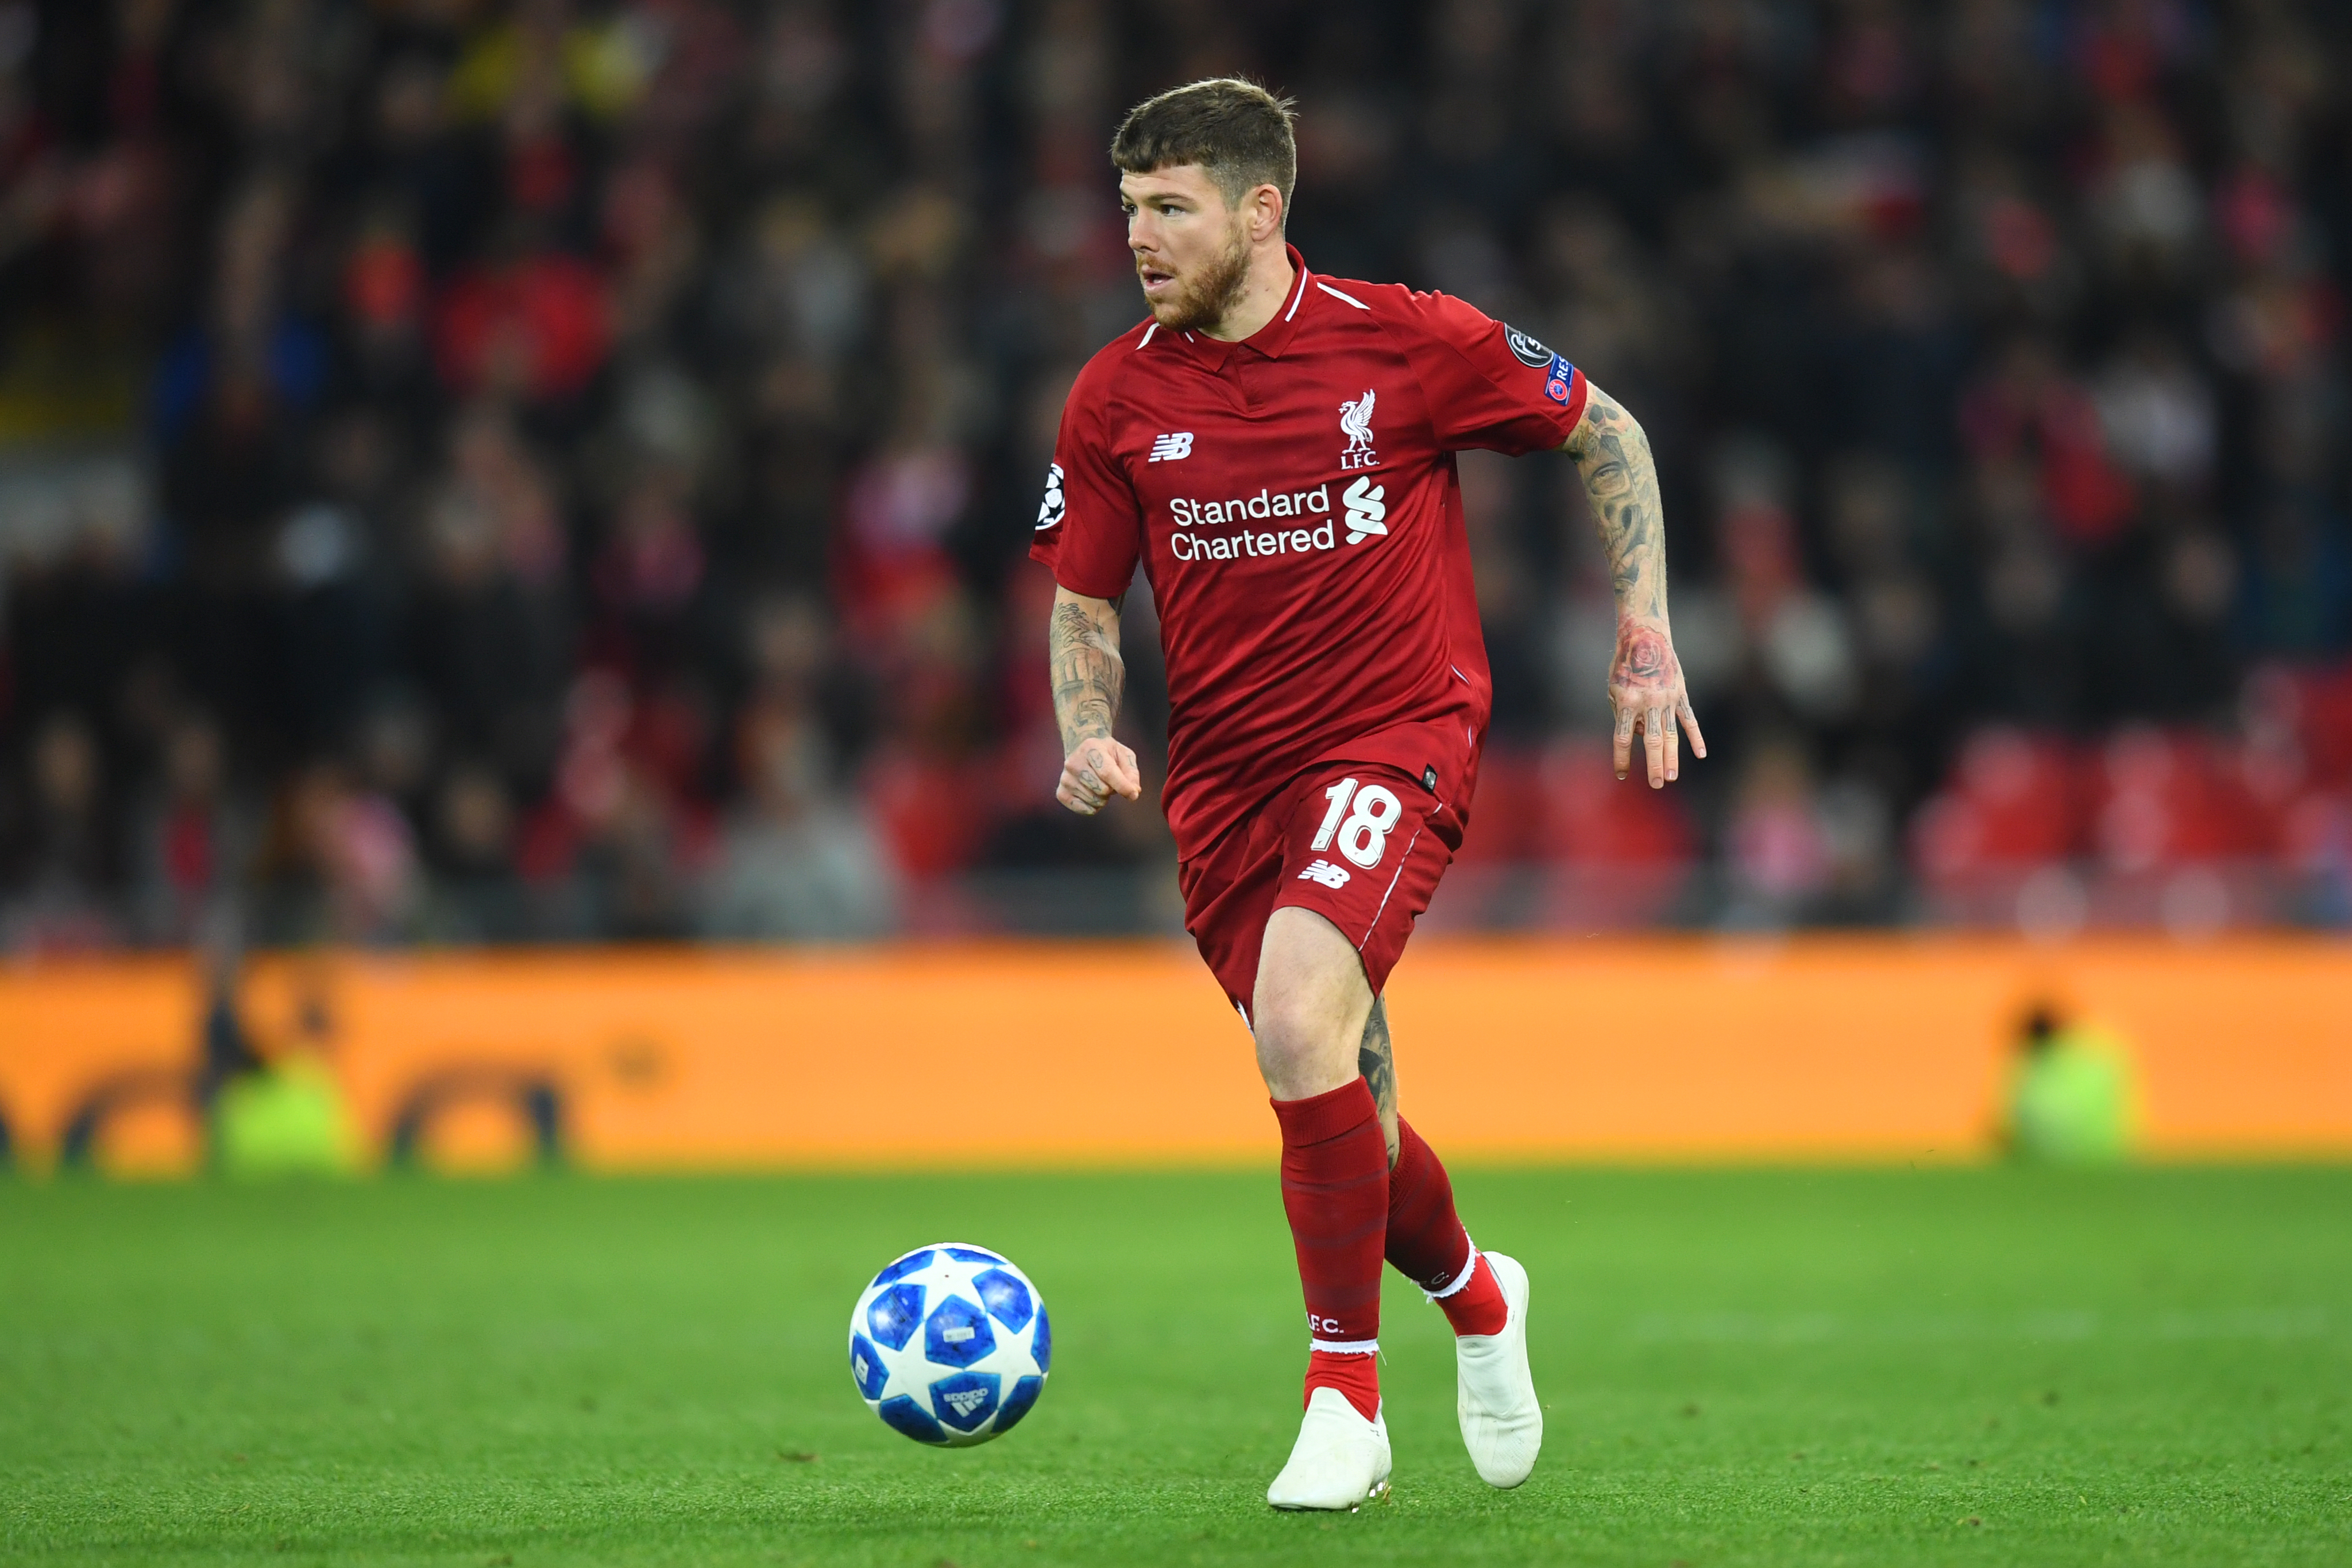 LIVERPOOL, ENGLAND - OCTOBER 24:  Alberto Moreno of Liverpool in action during the Group C match of the UEFA Champions League between Liverpool and FK Crvena Zvezda at Anfield on October 24, 2018 in Liverpool, United Kingdom.  (Photo by Michael Regan/Getty Images)